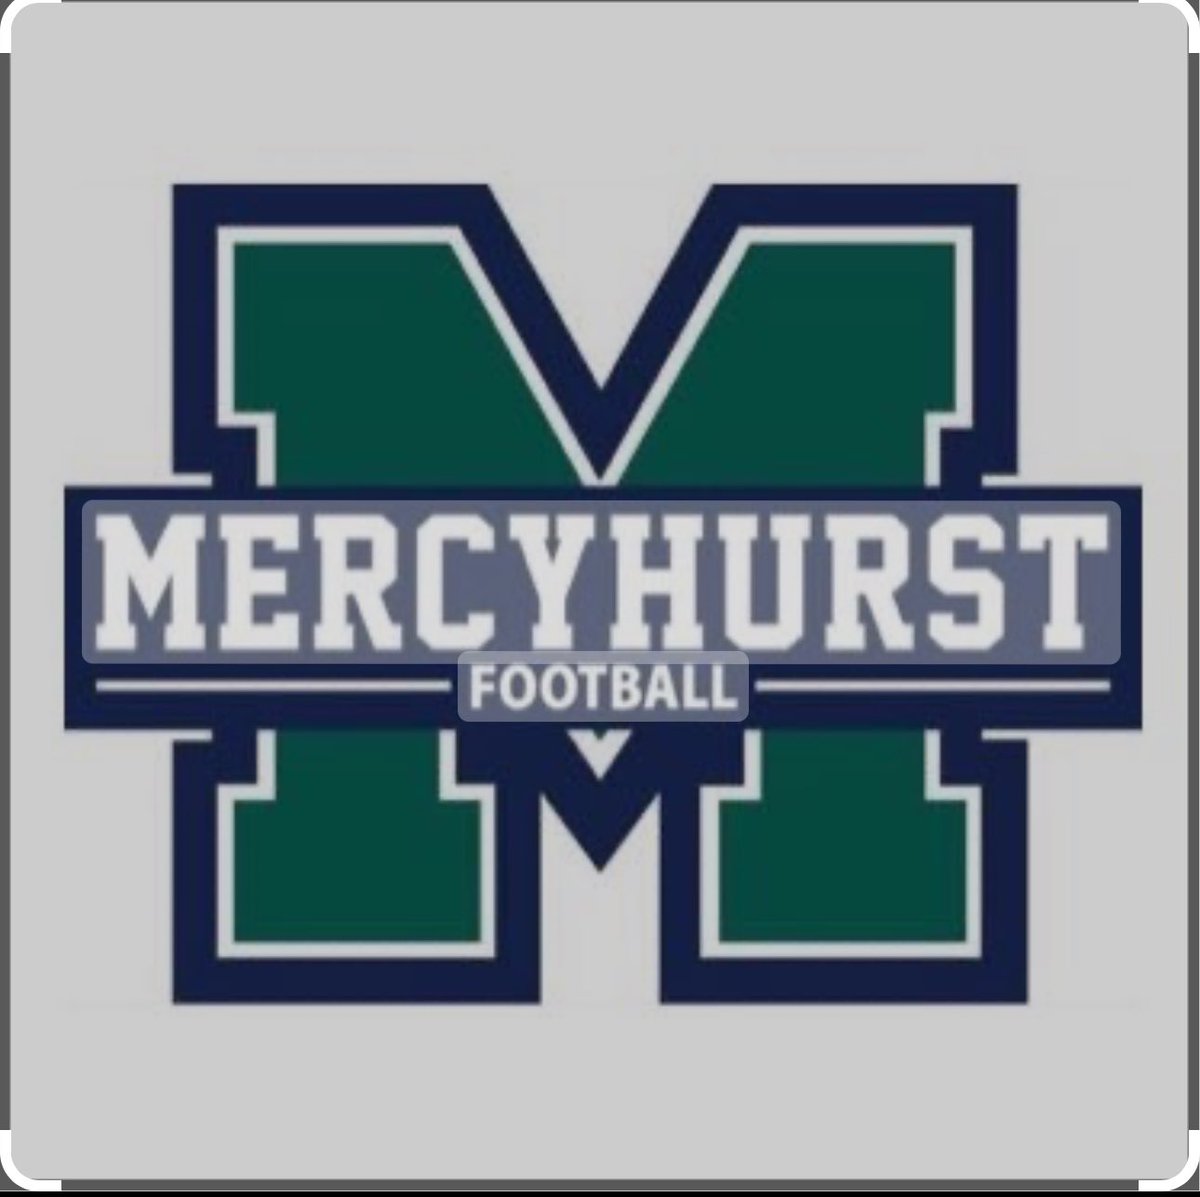 I had a great OV at @MercyhurstFB and appreciate the offer to play there! @air_mcnair7 @CoachSydeski @AlphaRecruits15 @RossApoWR_EZ @Penny_1